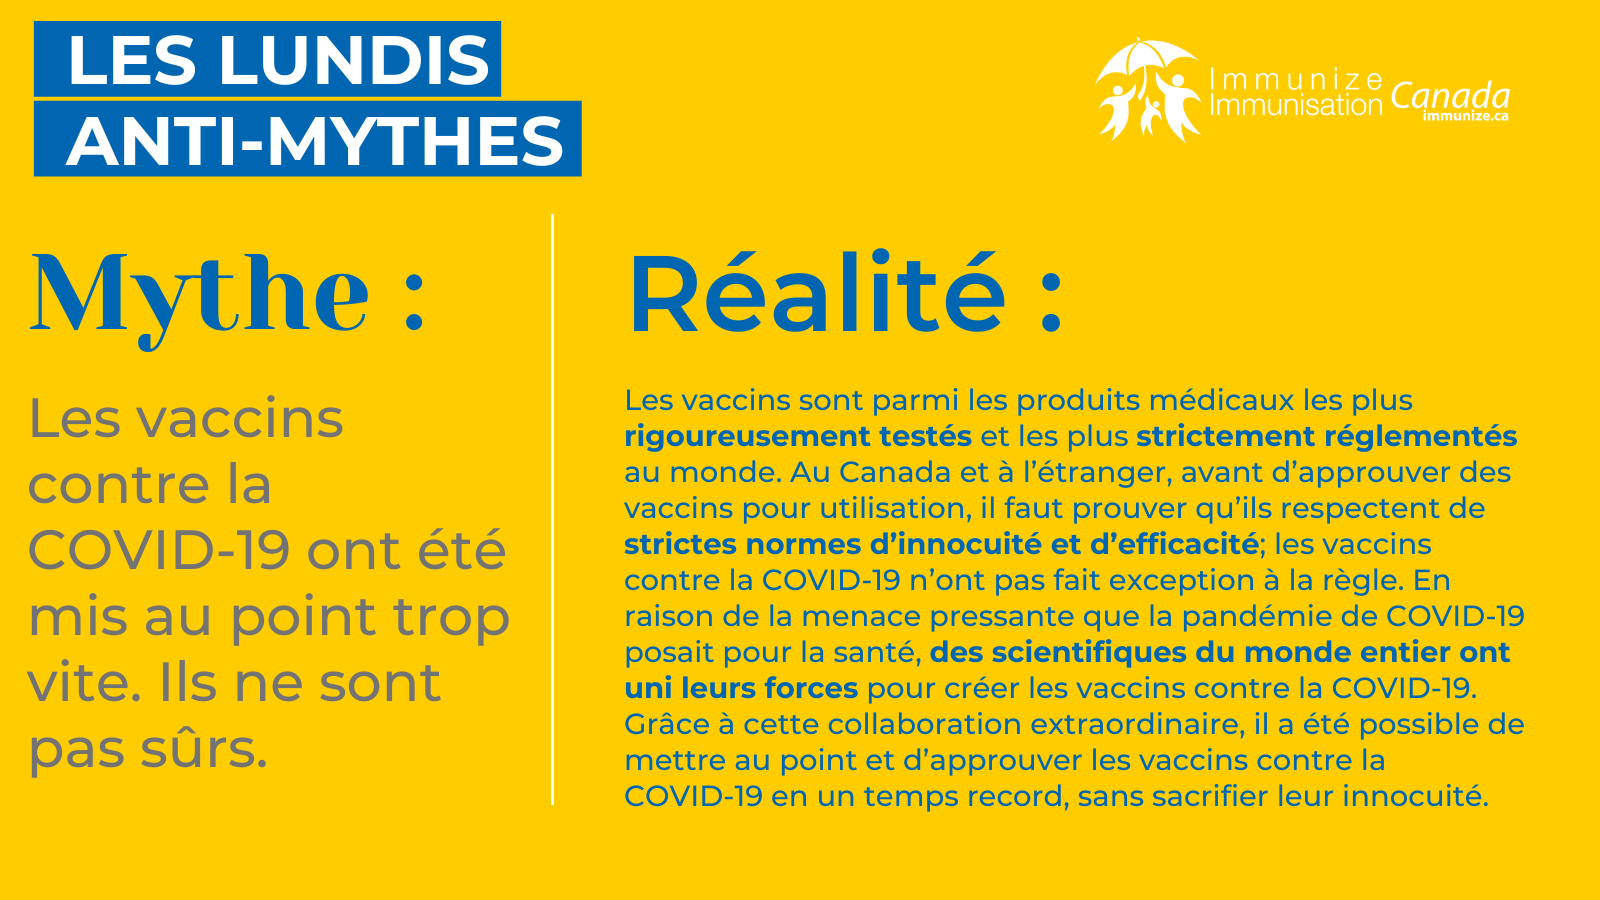 Les lundis anti-mythes - COVID-19 - image 8 pour Twitter/X